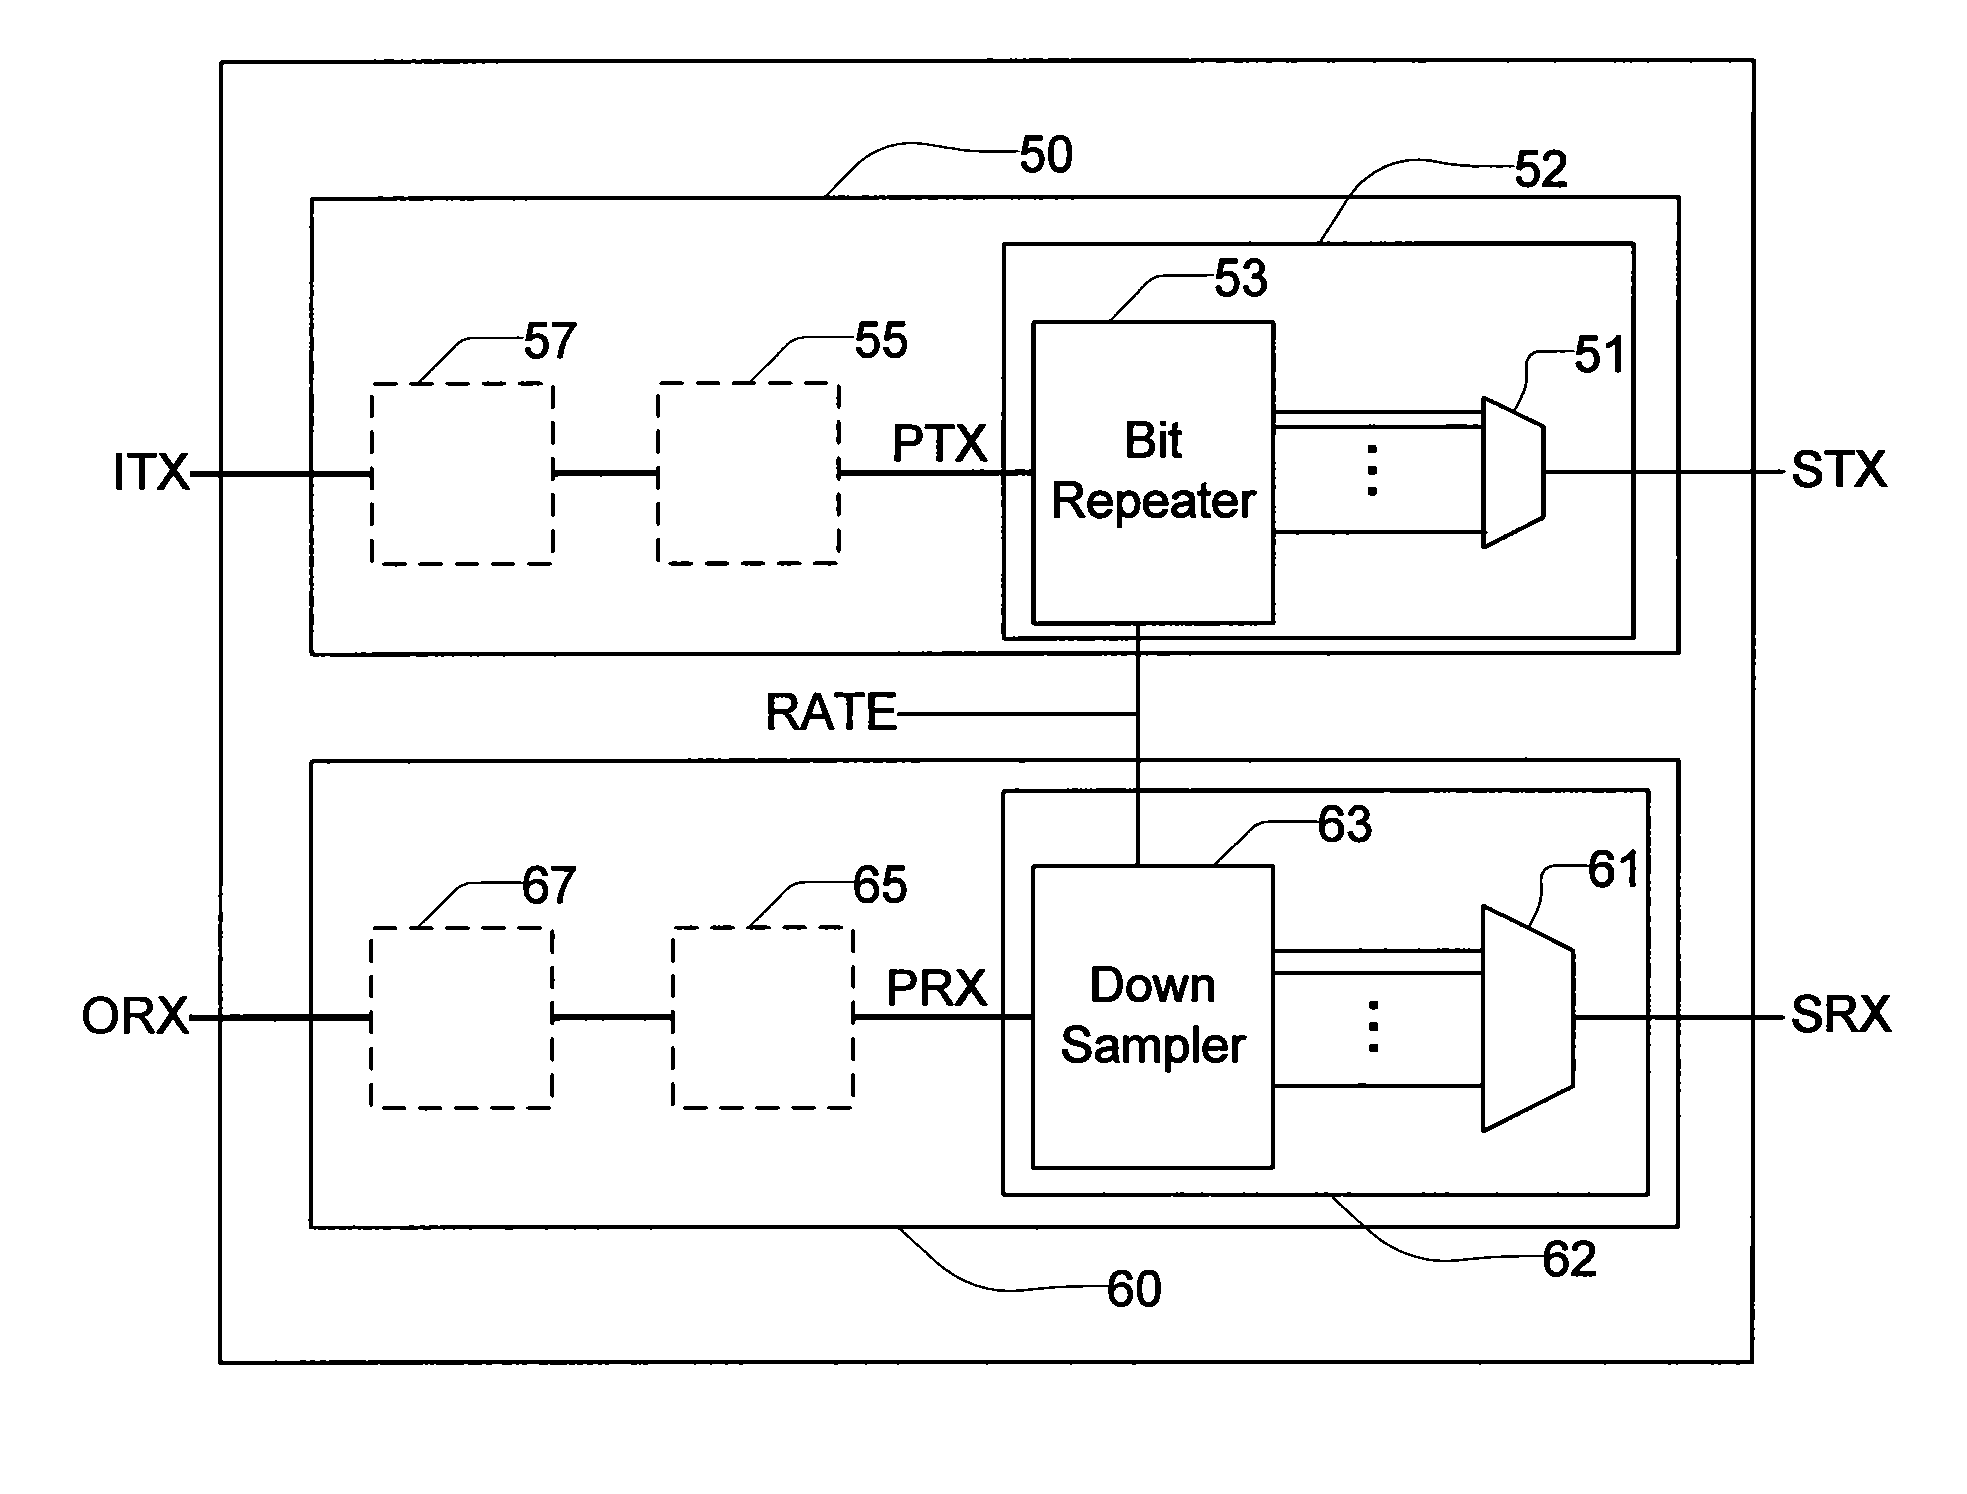 Multi-rate serializer/deserializer circuit with broad operating frequency range